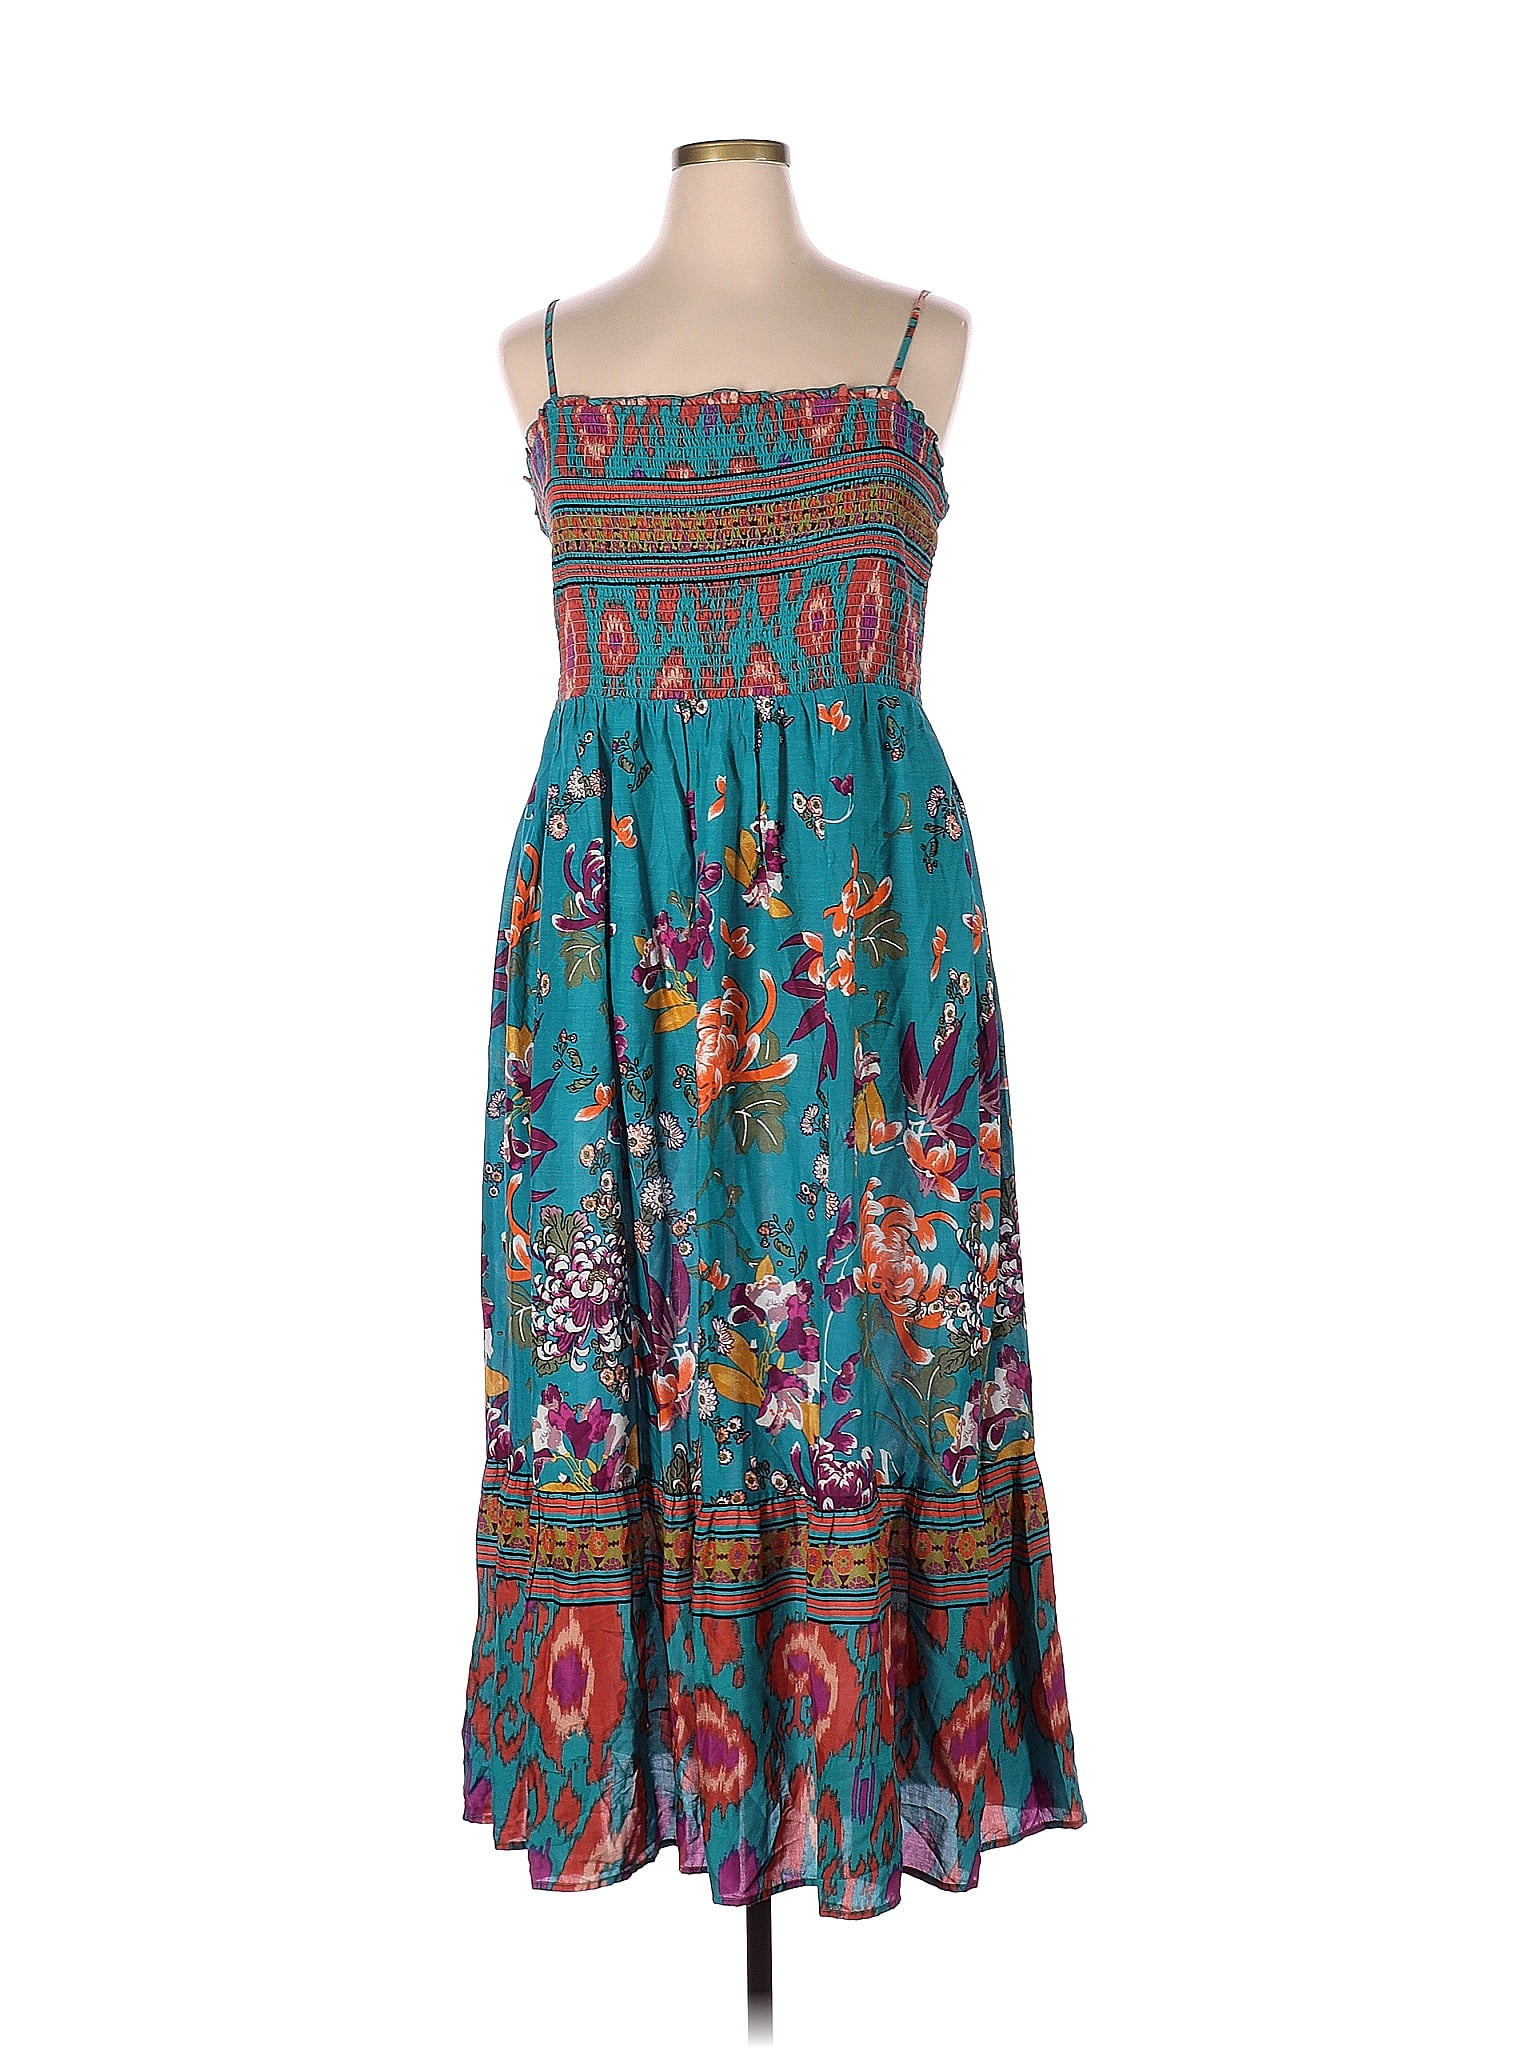 Anthropologie 100% Modal Floral Teal Casual Dress Size XL (Petite) - 53 ...